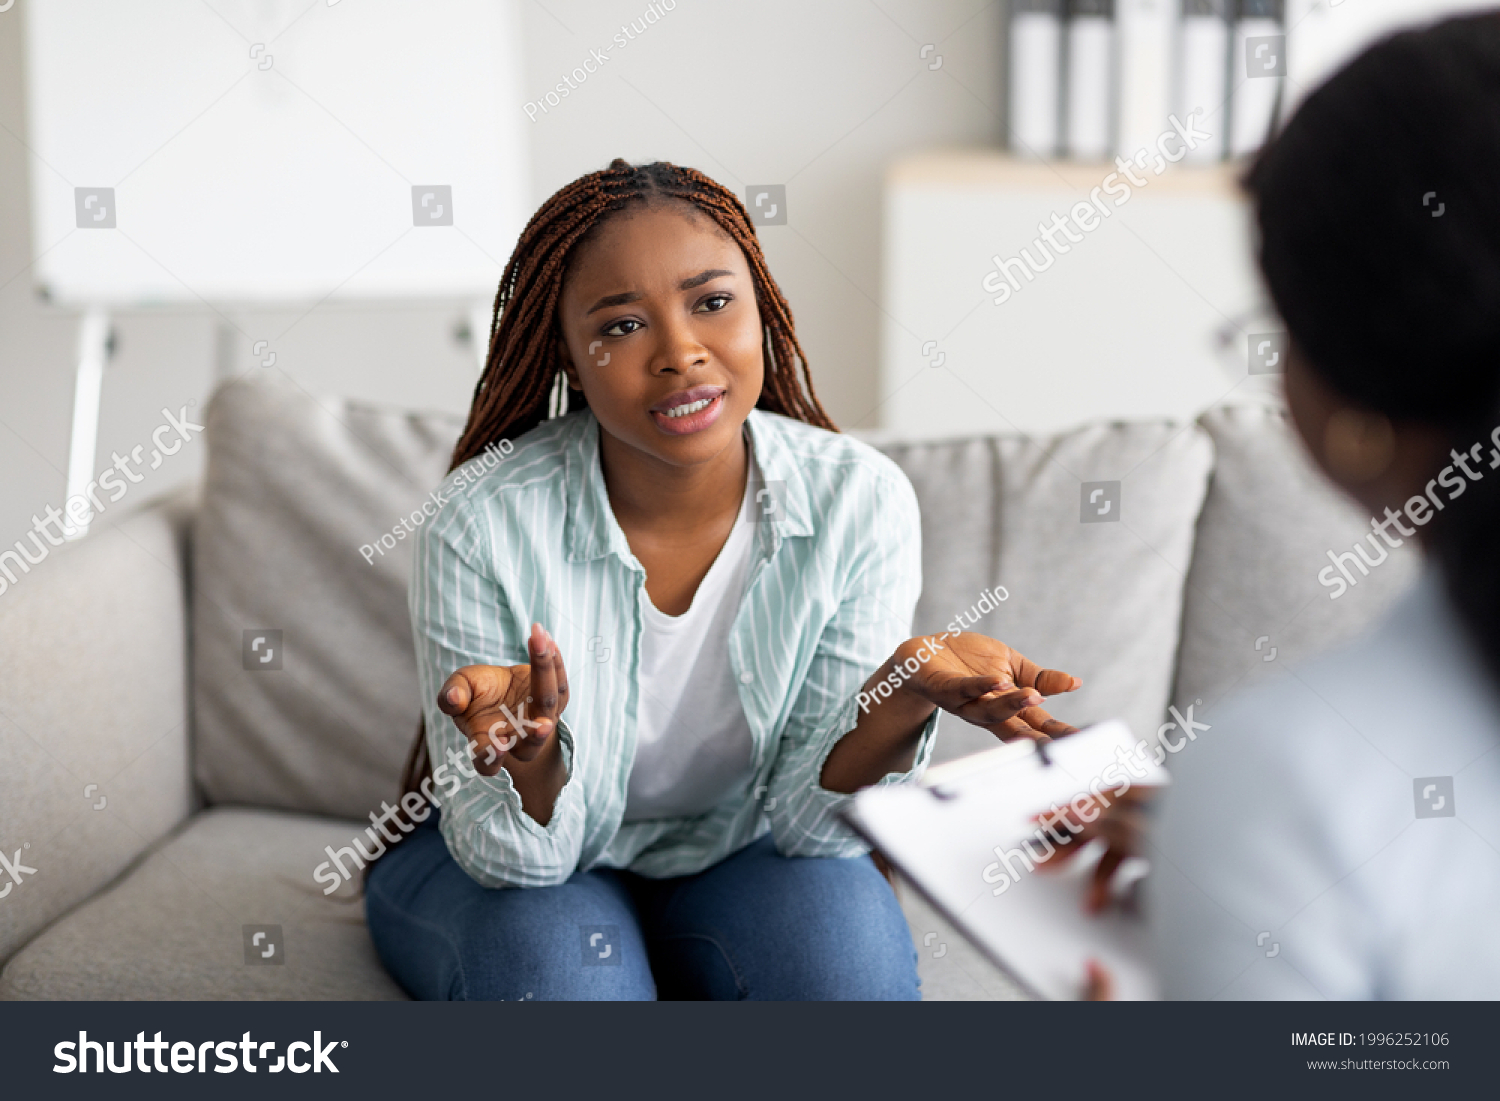 Mental health and psychological assistance concept. Young worried black woman having counseling session with psychotherapist at clinic. PTSD disorder, anxiety treatment #1996252106